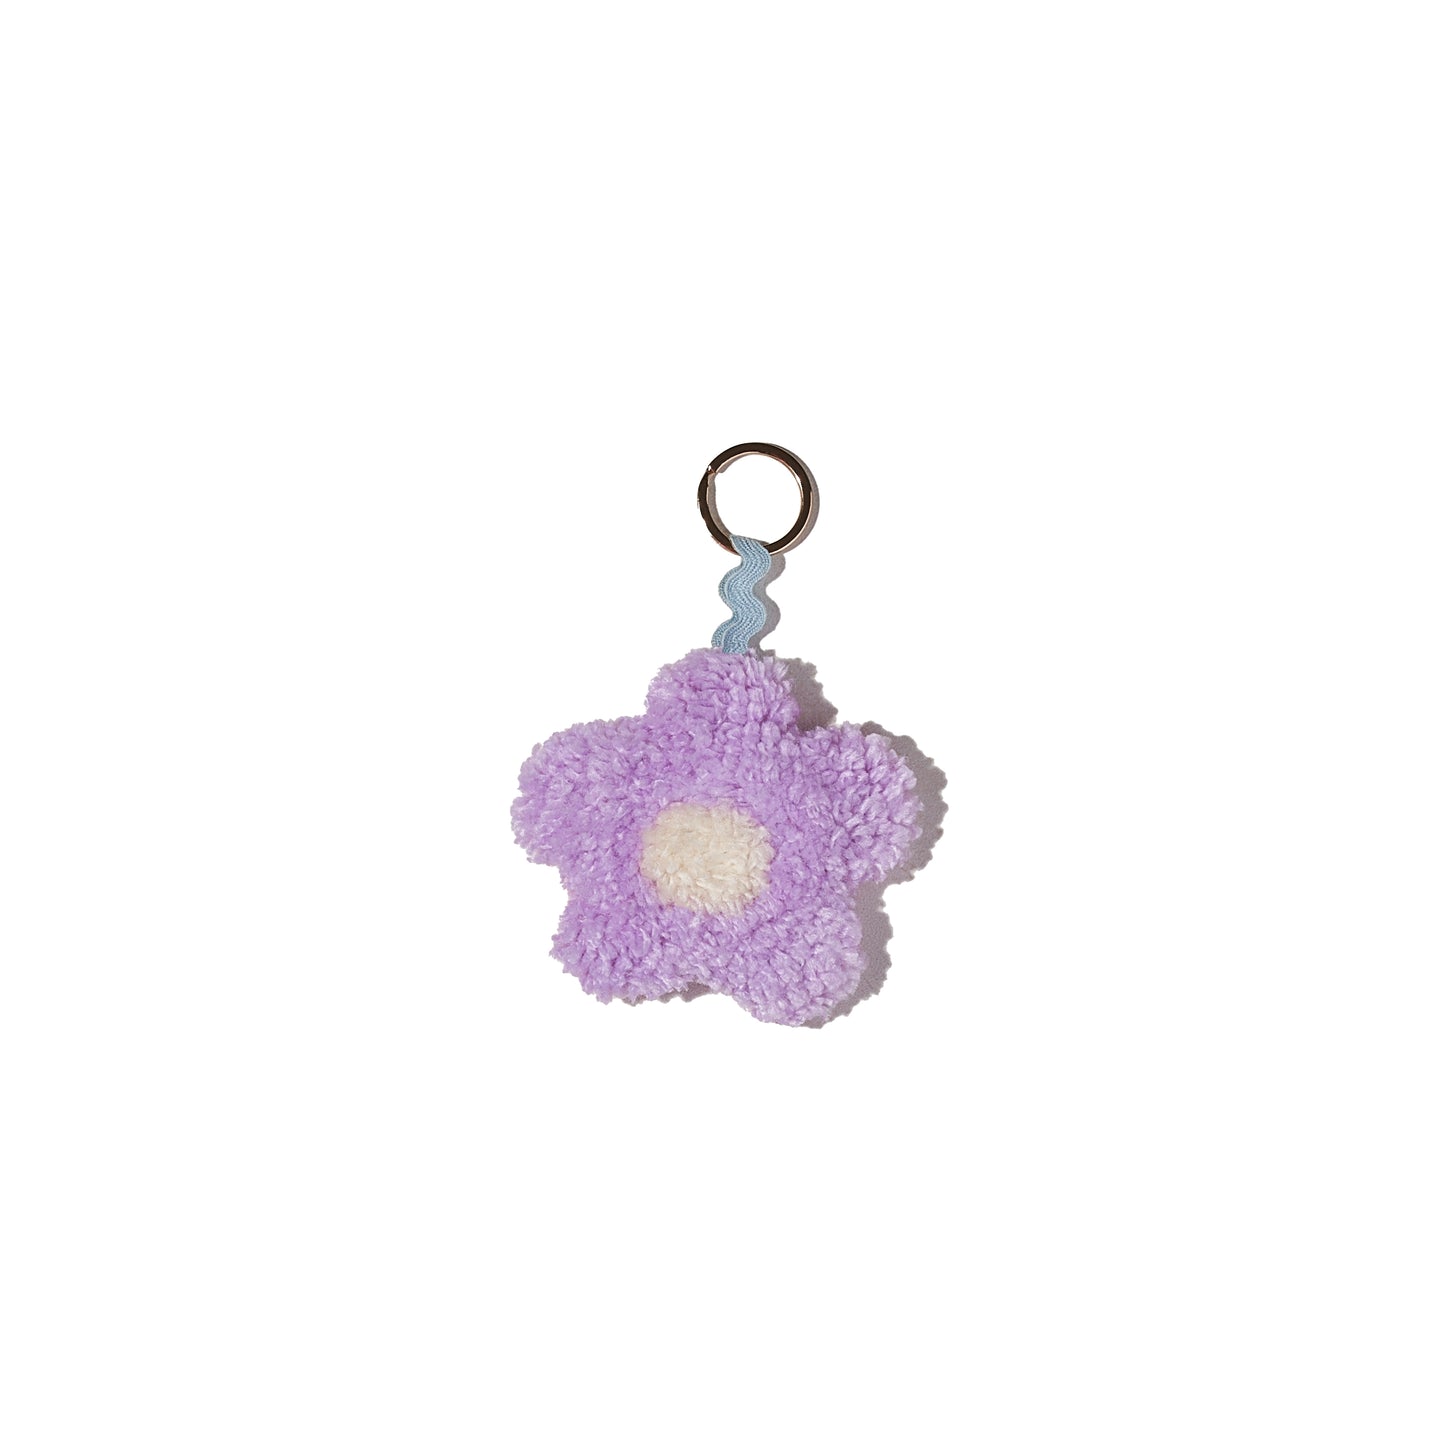 Tufted Patch Bag Charms